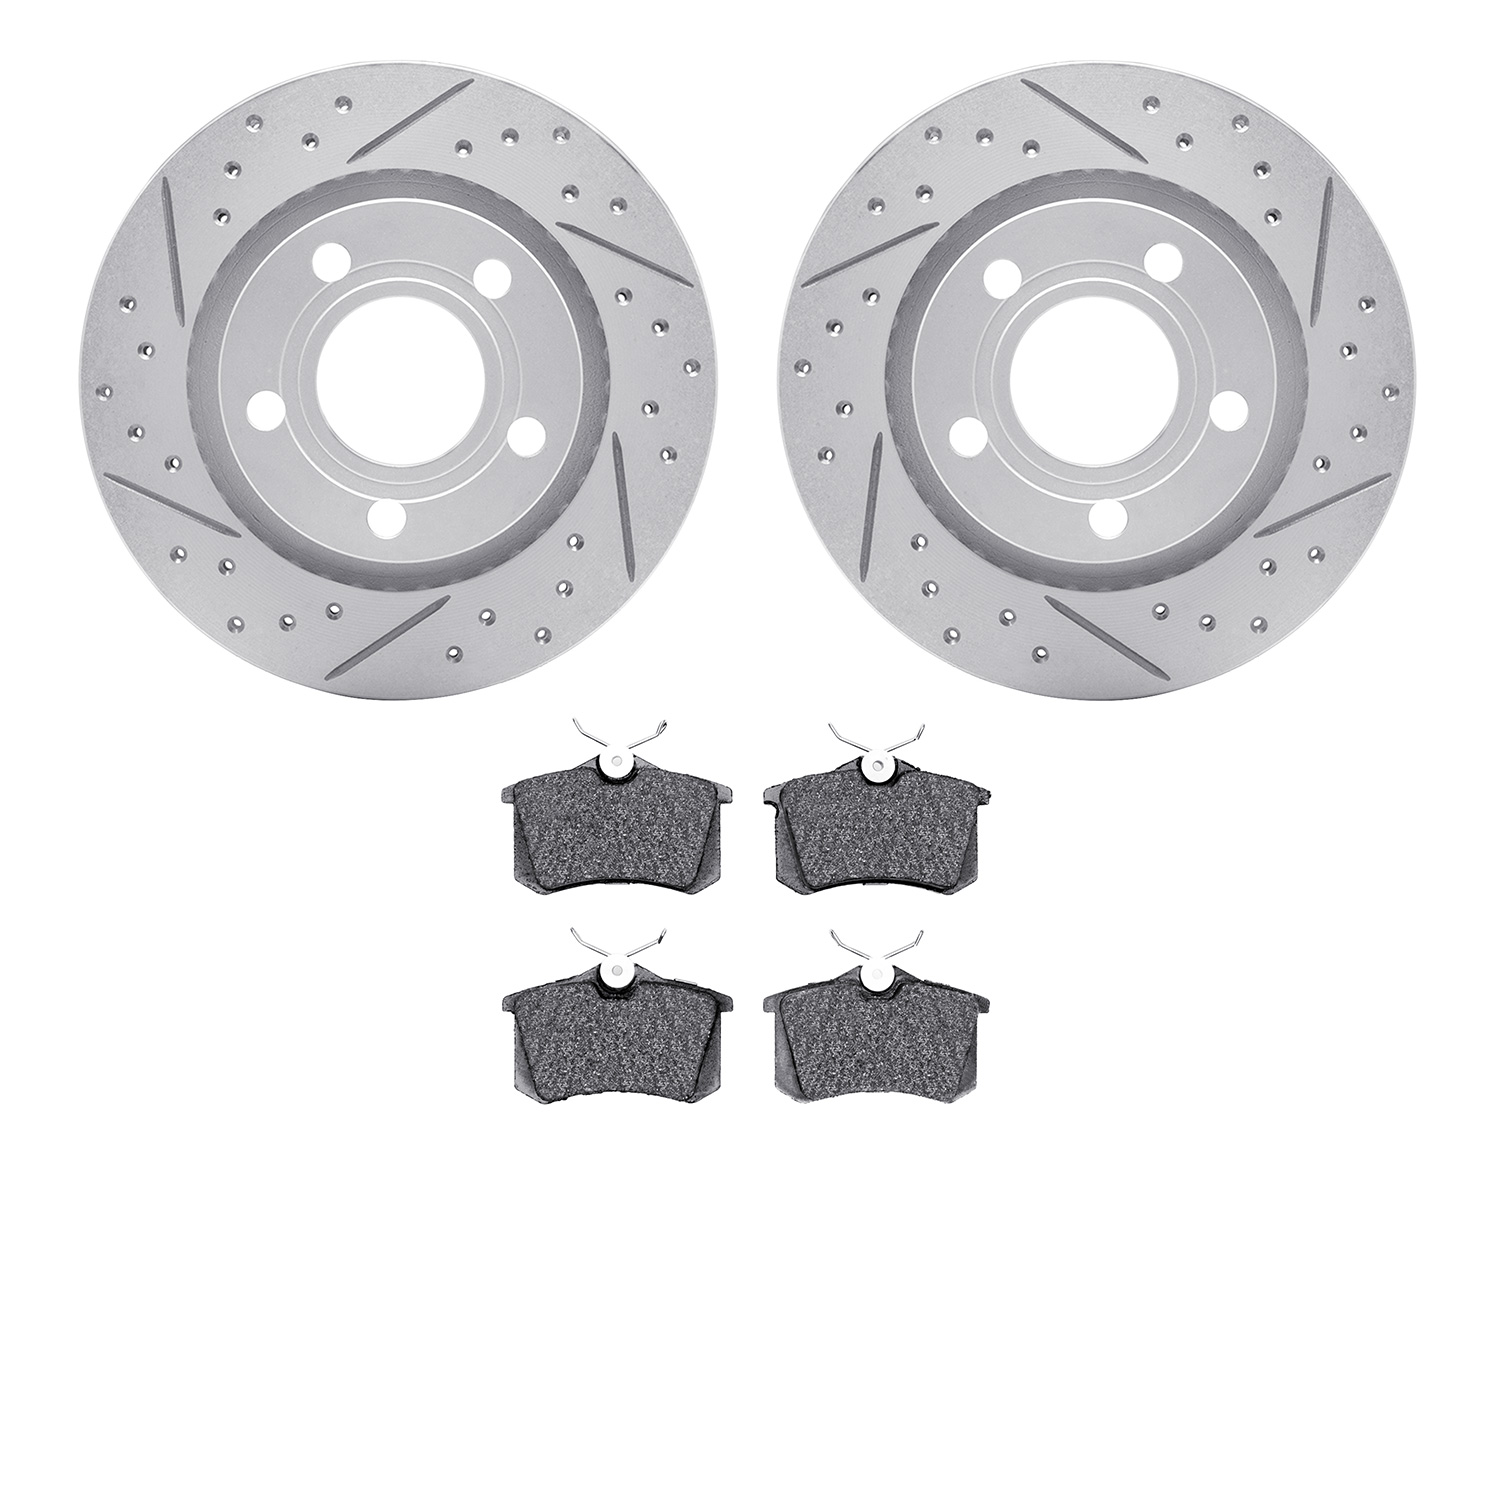 2502-74032 Geoperformance Drilled/Slotted Rotors w/5000 Advanced Brake Pads Kit, 2002-2005 Audi/Volkswagen, Position: Rear